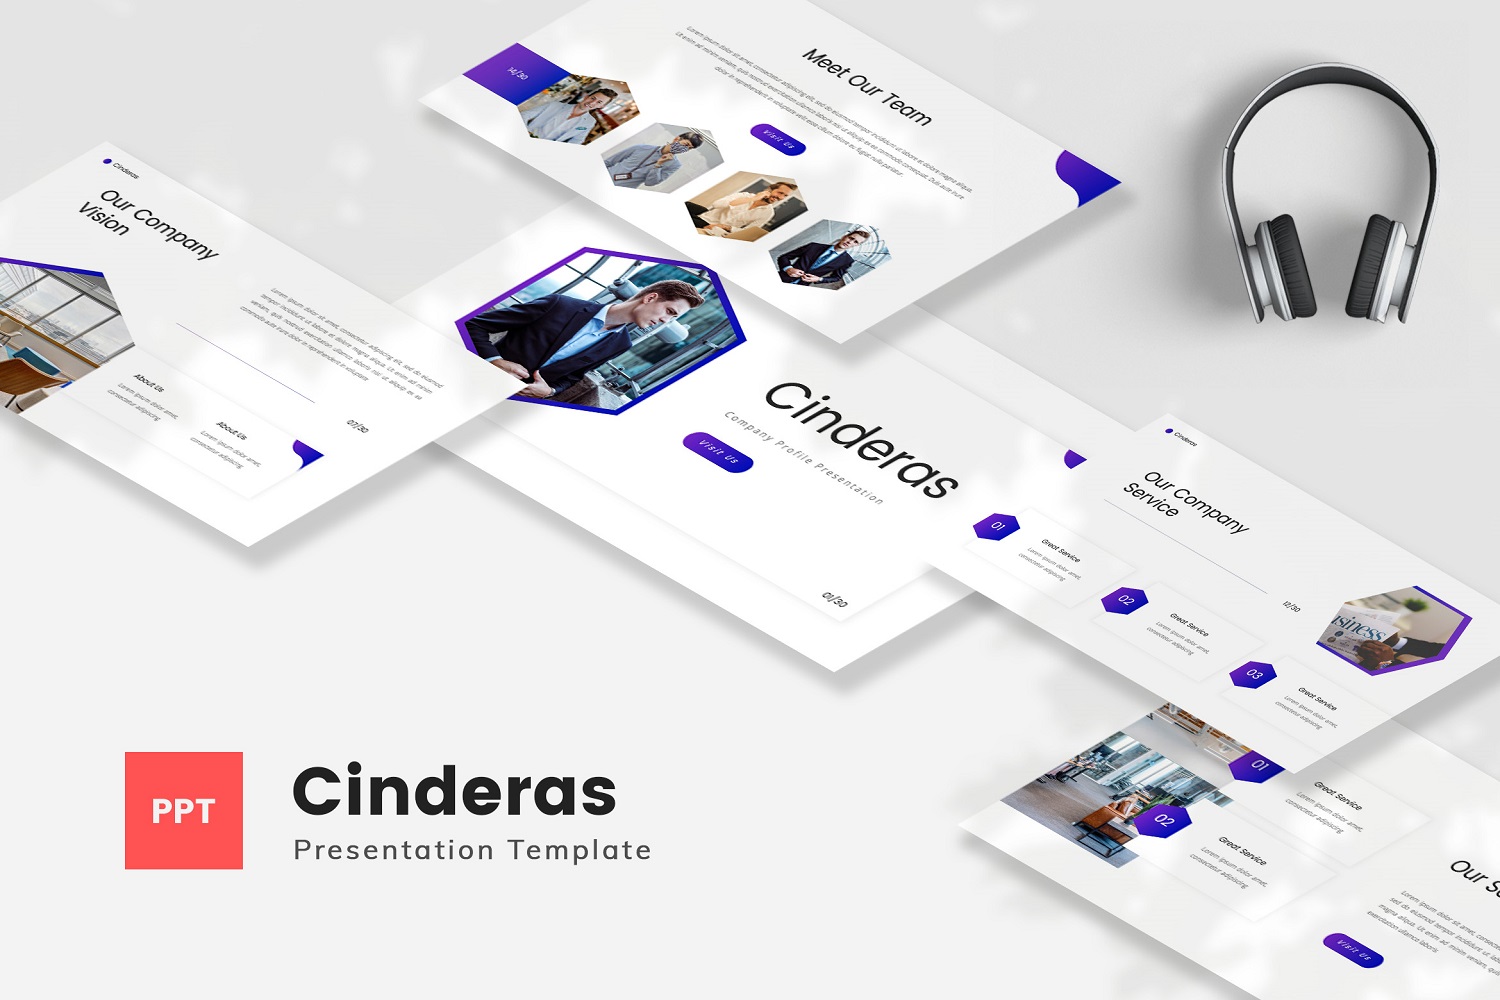 Cinderas - Company Profile PowerPoint Template